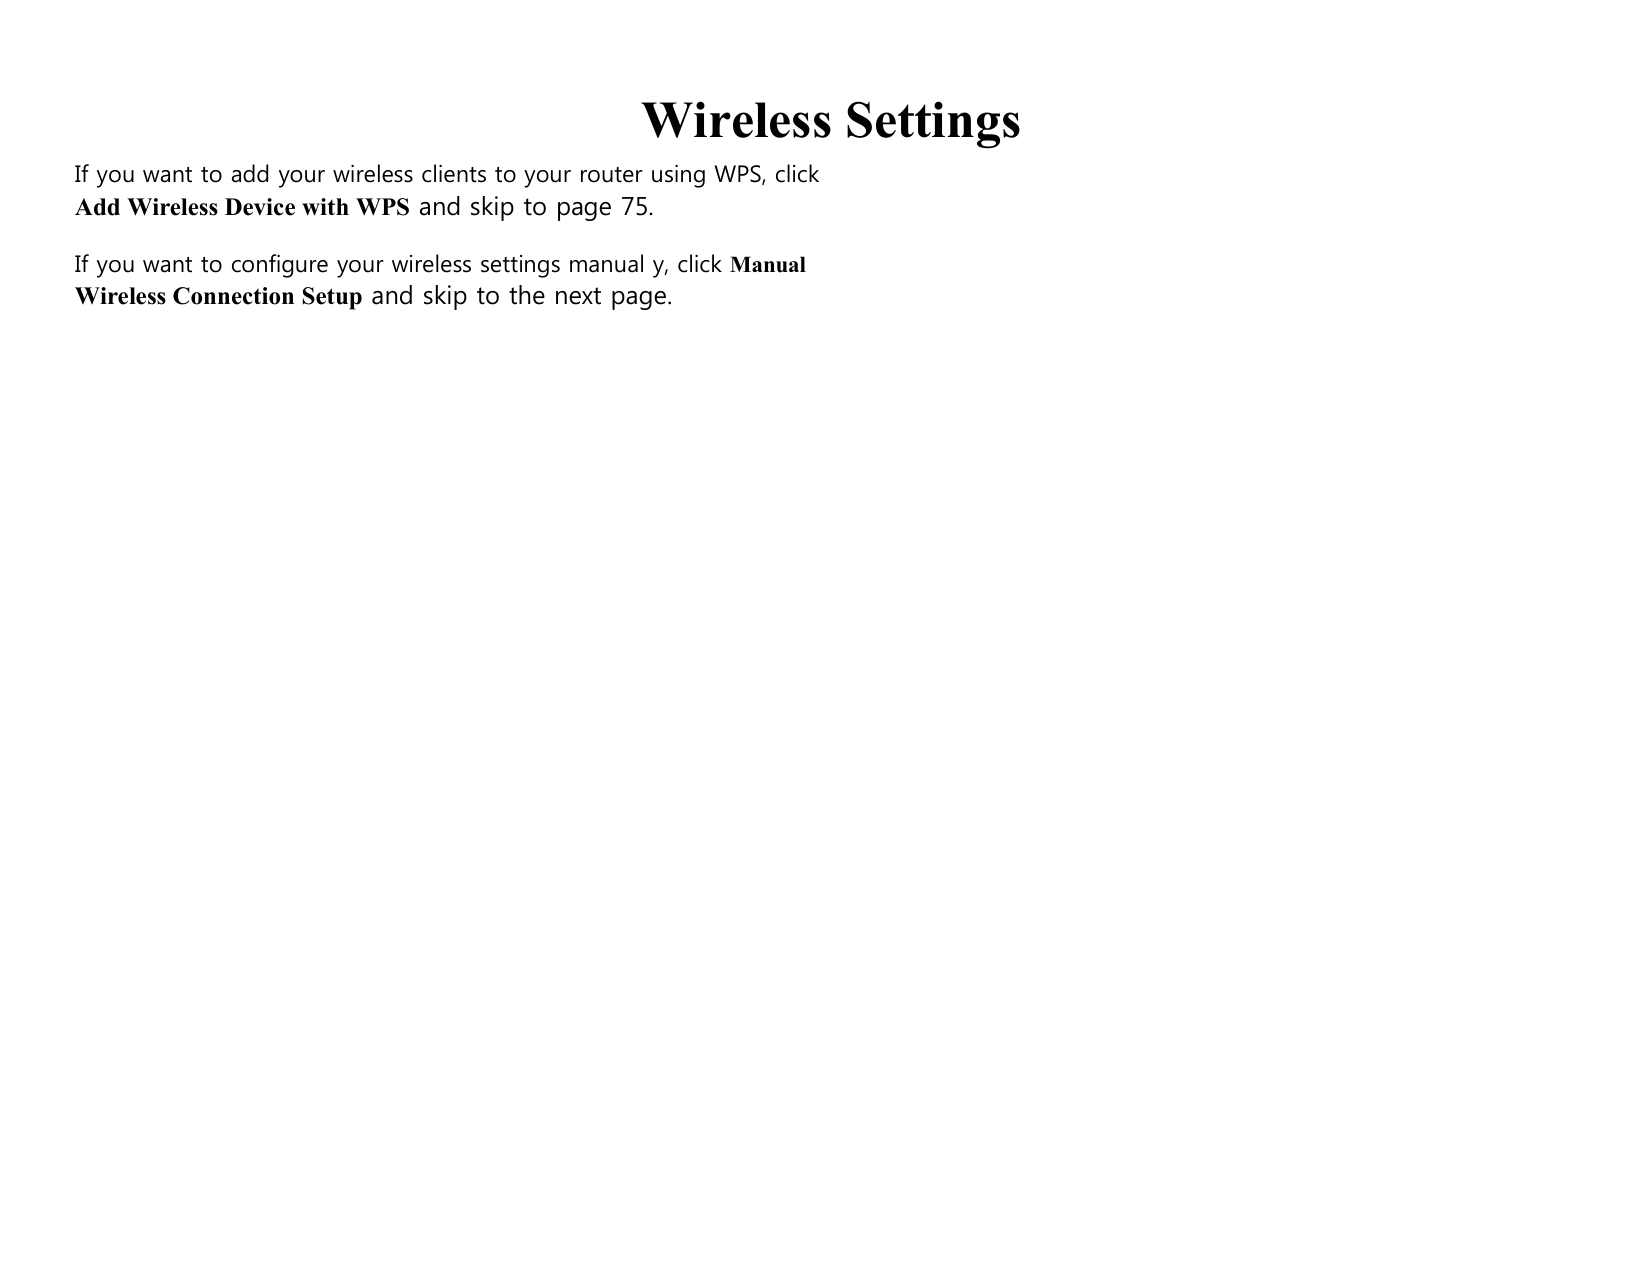     Wireless Settings If you want to add your wireless clients to your router using WPS, click Add Wireless Device with WPS and skip to page 75.  If you want to configure your wireless settings manual y, click Manual Wireless Connection Setup and skip to the next page.                                